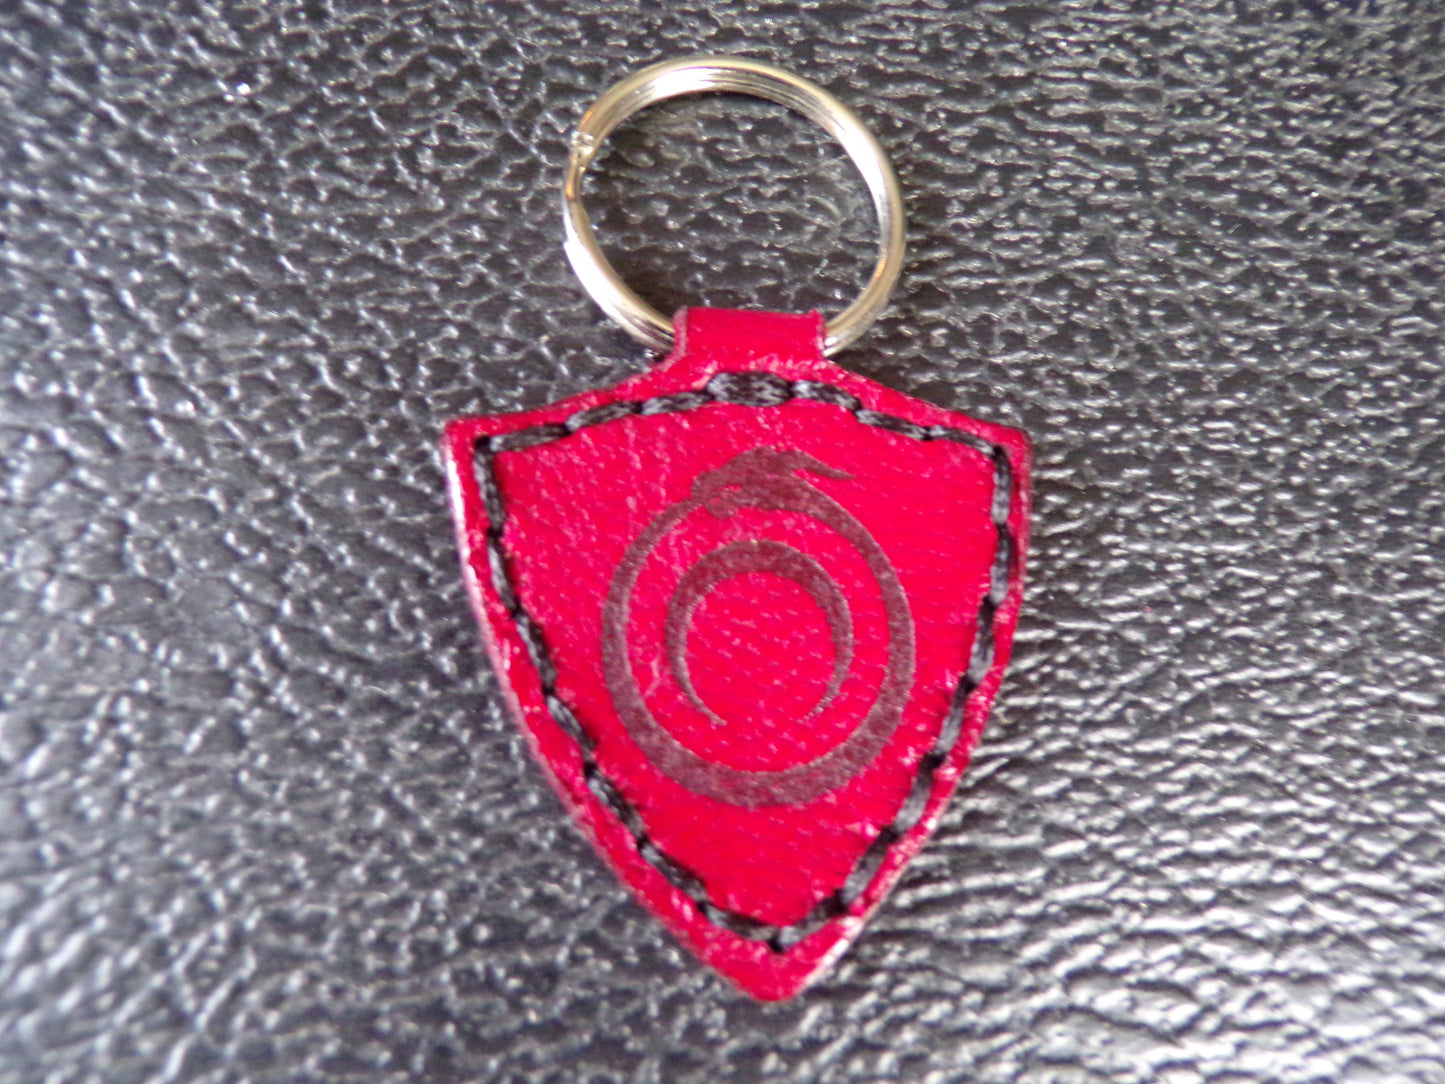 Styx Two-sided Shield Red Leather Key Chain